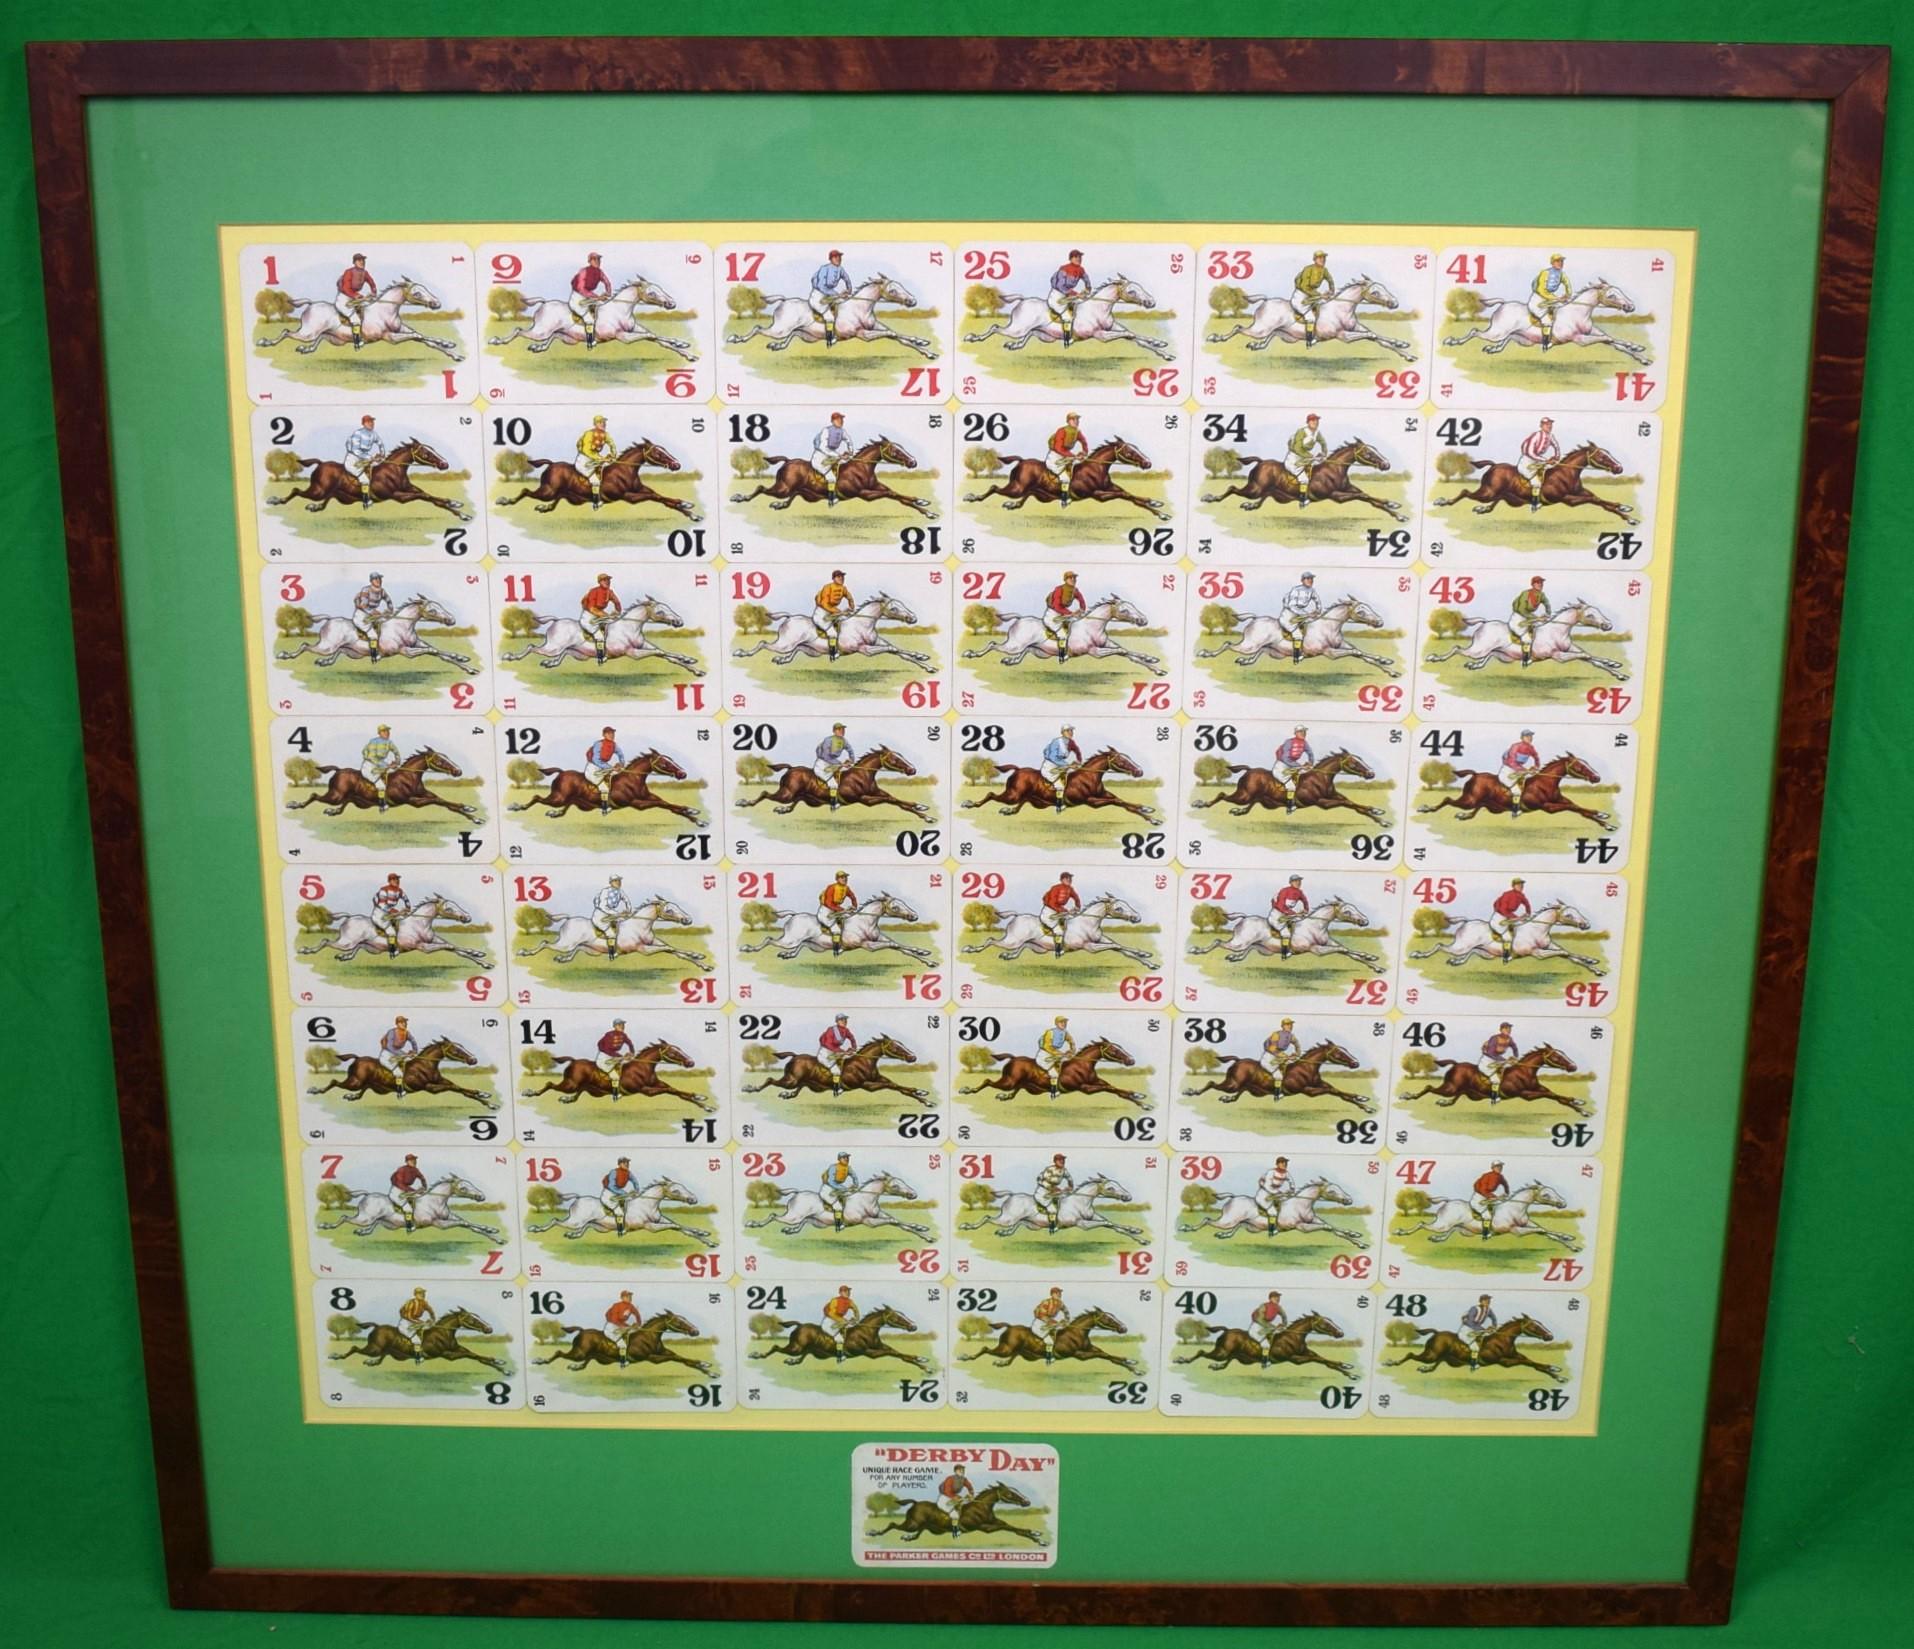 "Derby Day" 48 Framed Playing Cards/ Jockey/ Horse Racing" - Print by Unknown